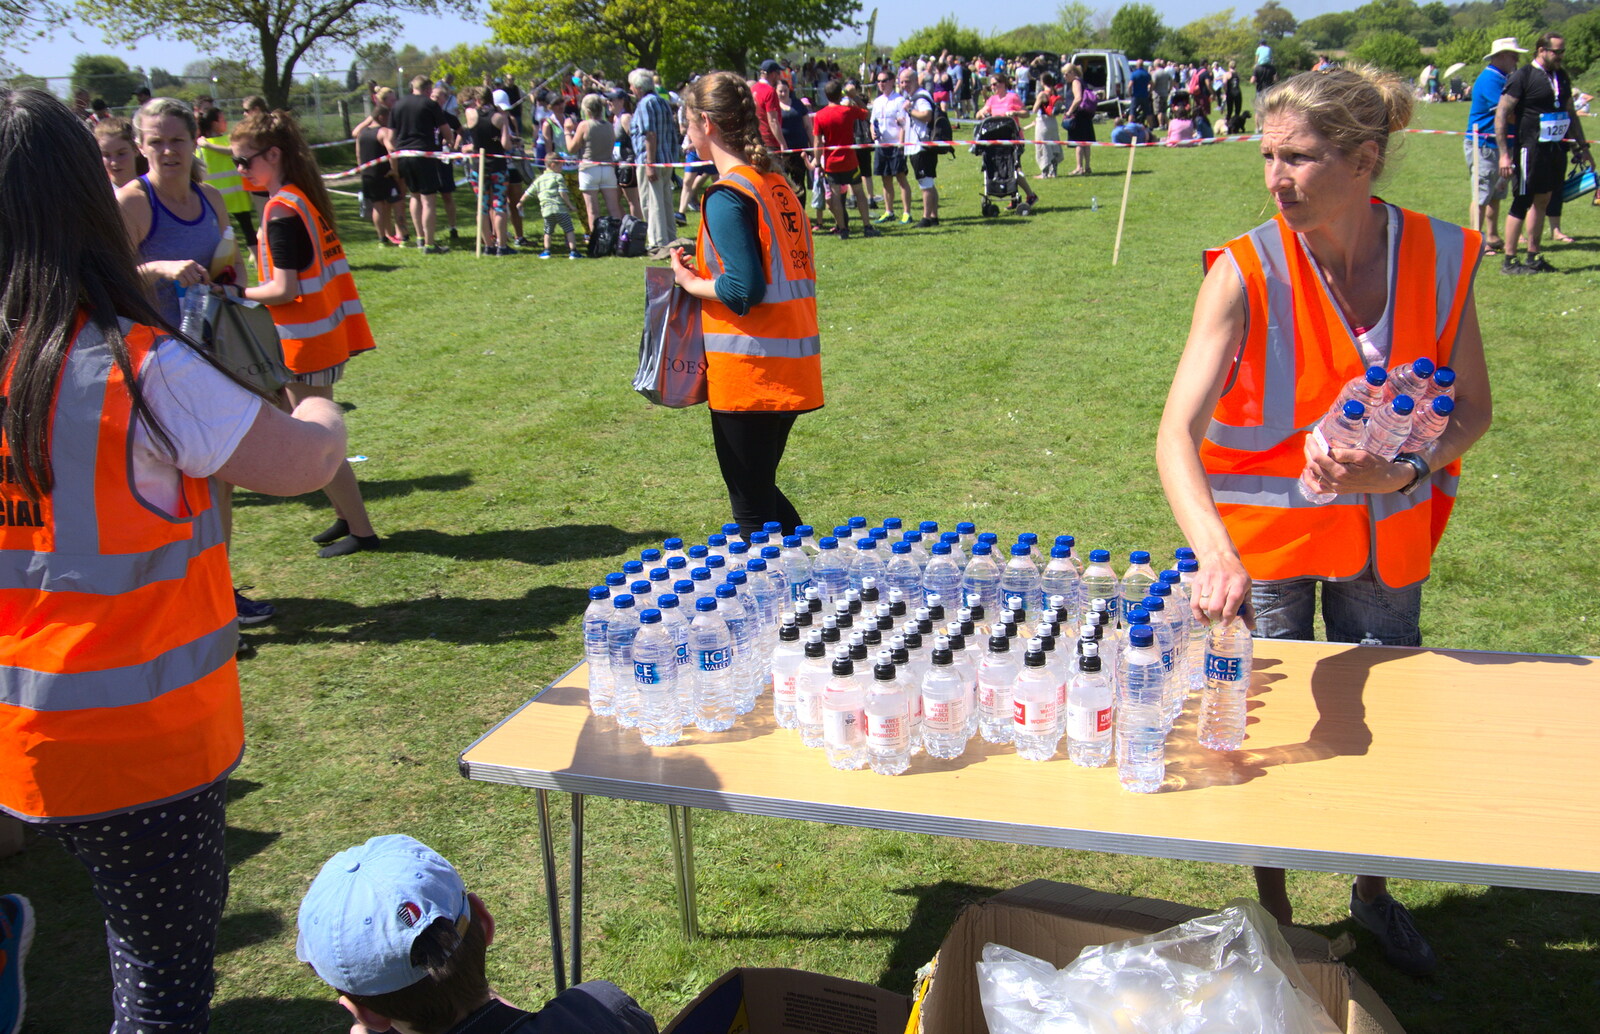 The water station from Isobel's 10km Run, Alton Water, Stutton, Suffolk - 6th May 2018